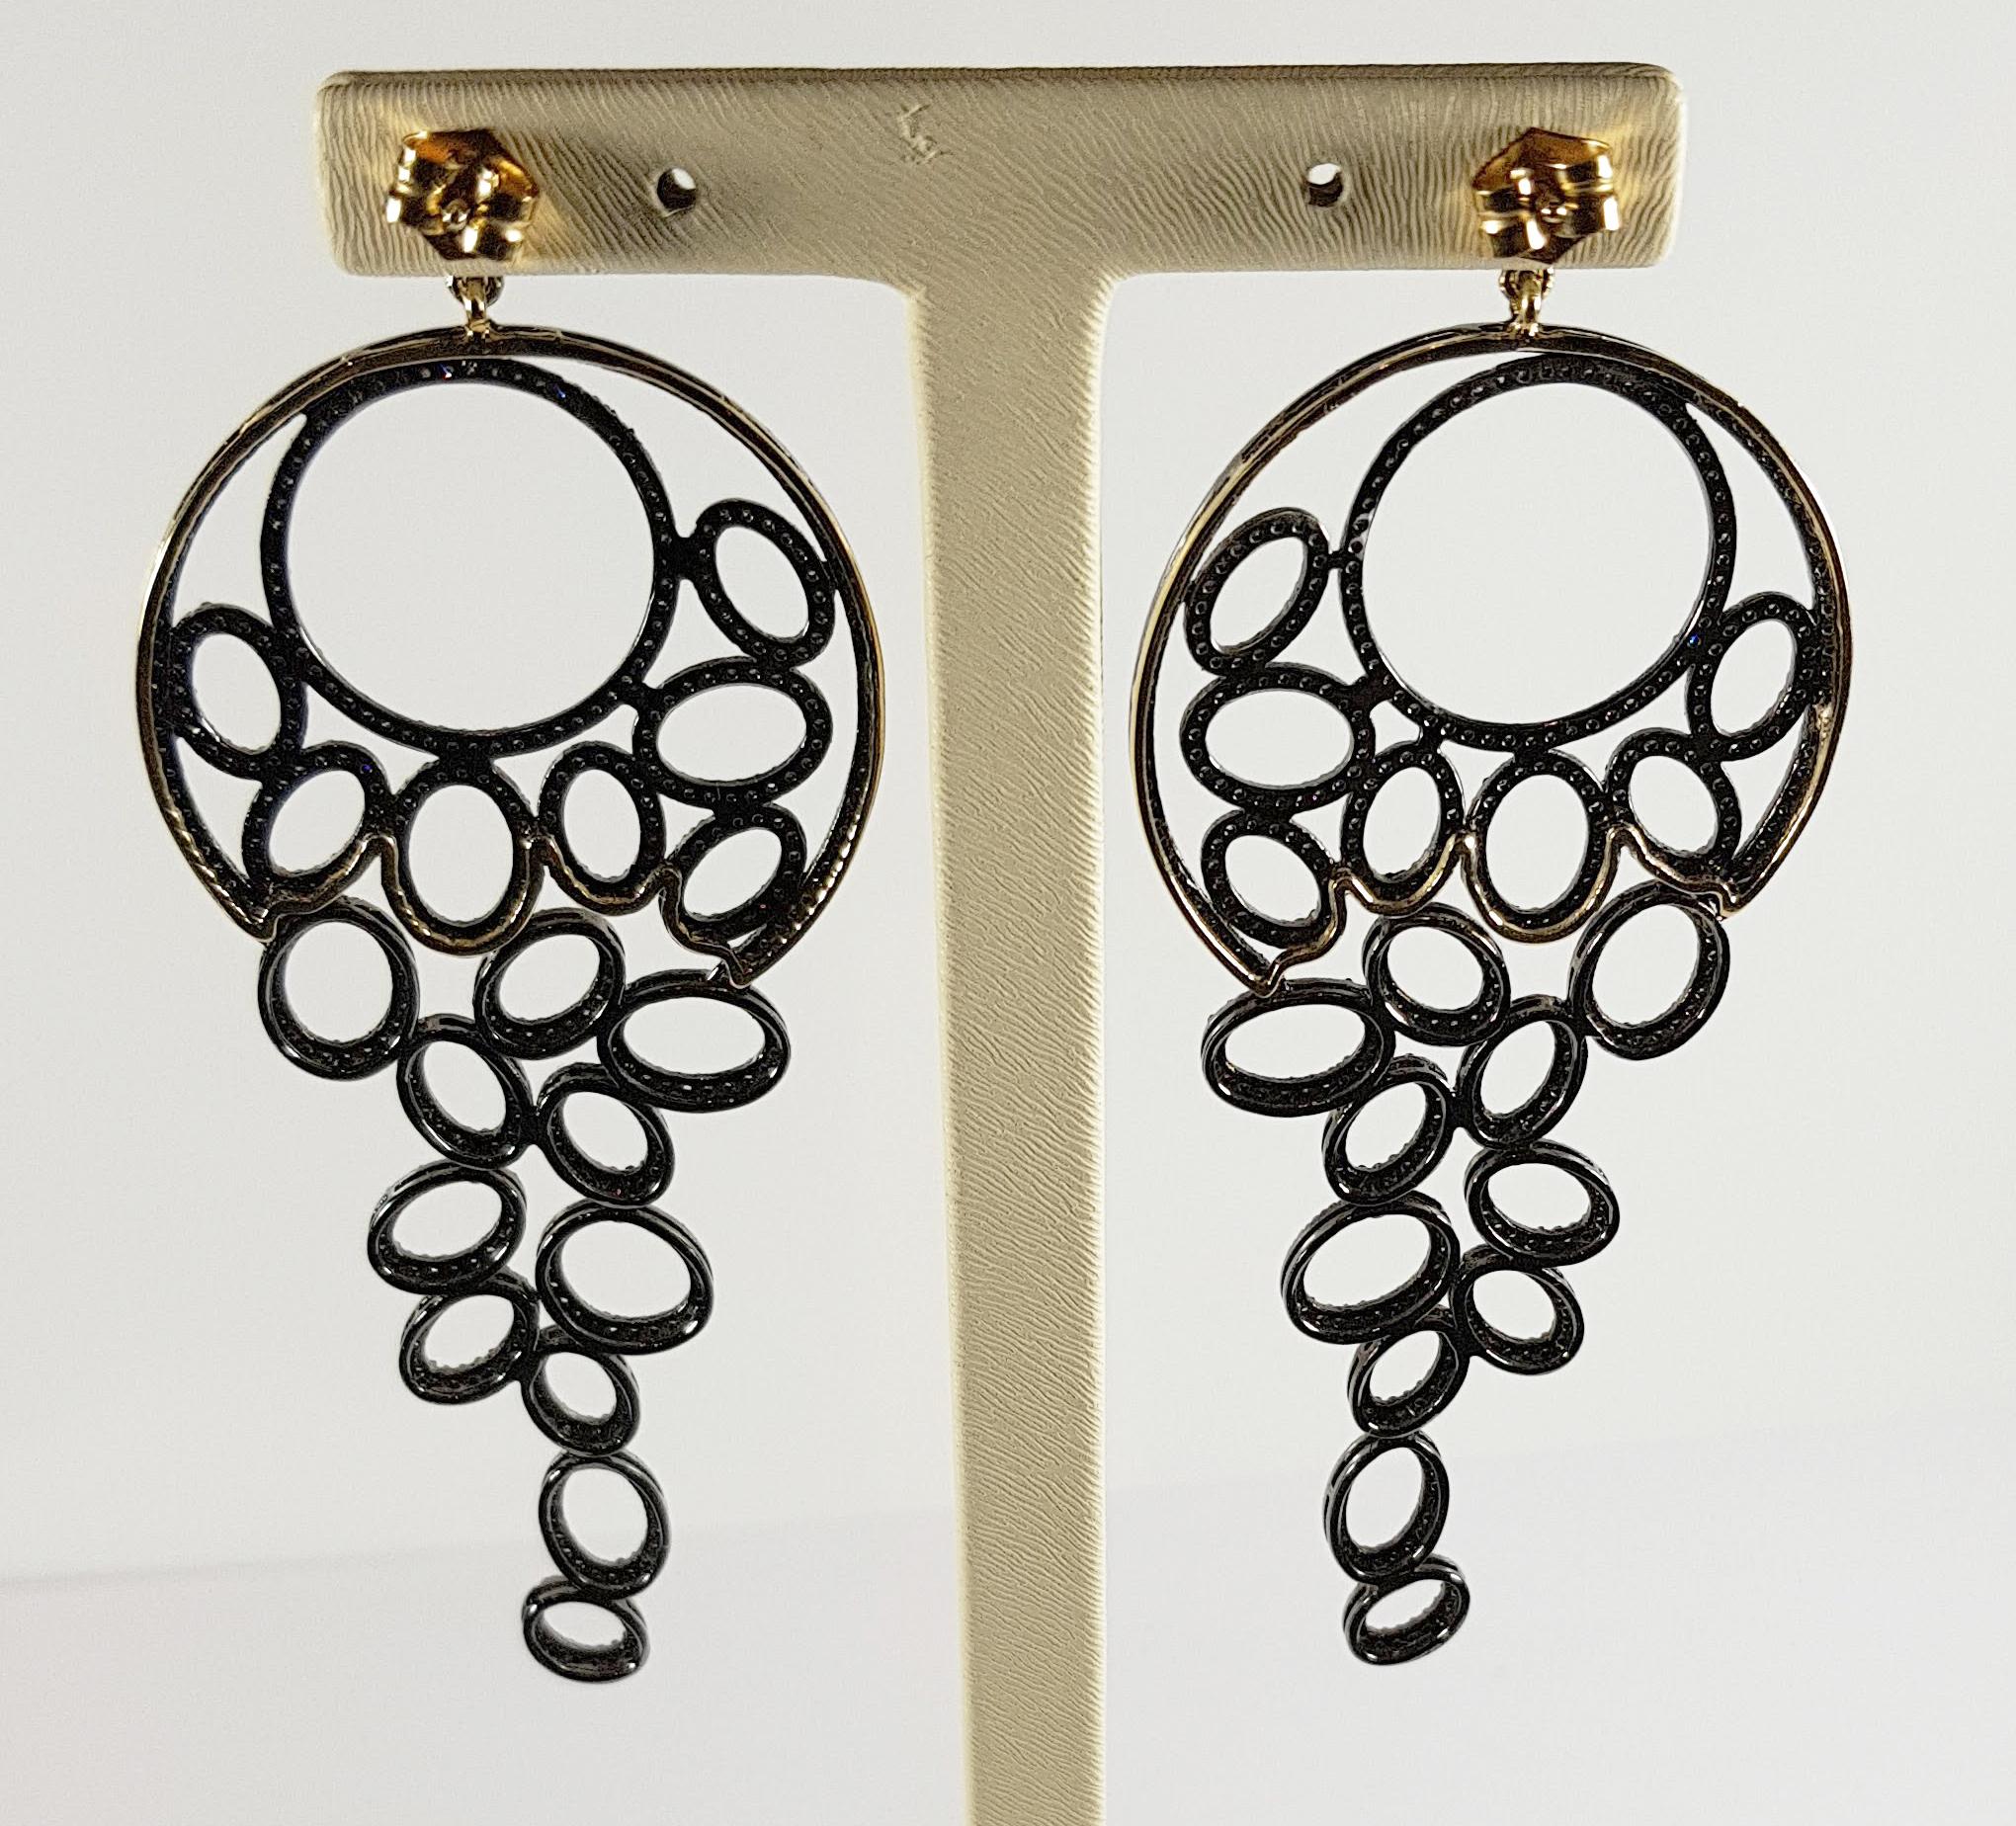 Irama Pradera is a Young designer from Spain that searches always for the best gems and combines classic with contemporary mounting and styles. 
This Dangle Circular Disco movement earrings portray freedom and aurea movement. 

◘ Weight 22.52 gr.
◘